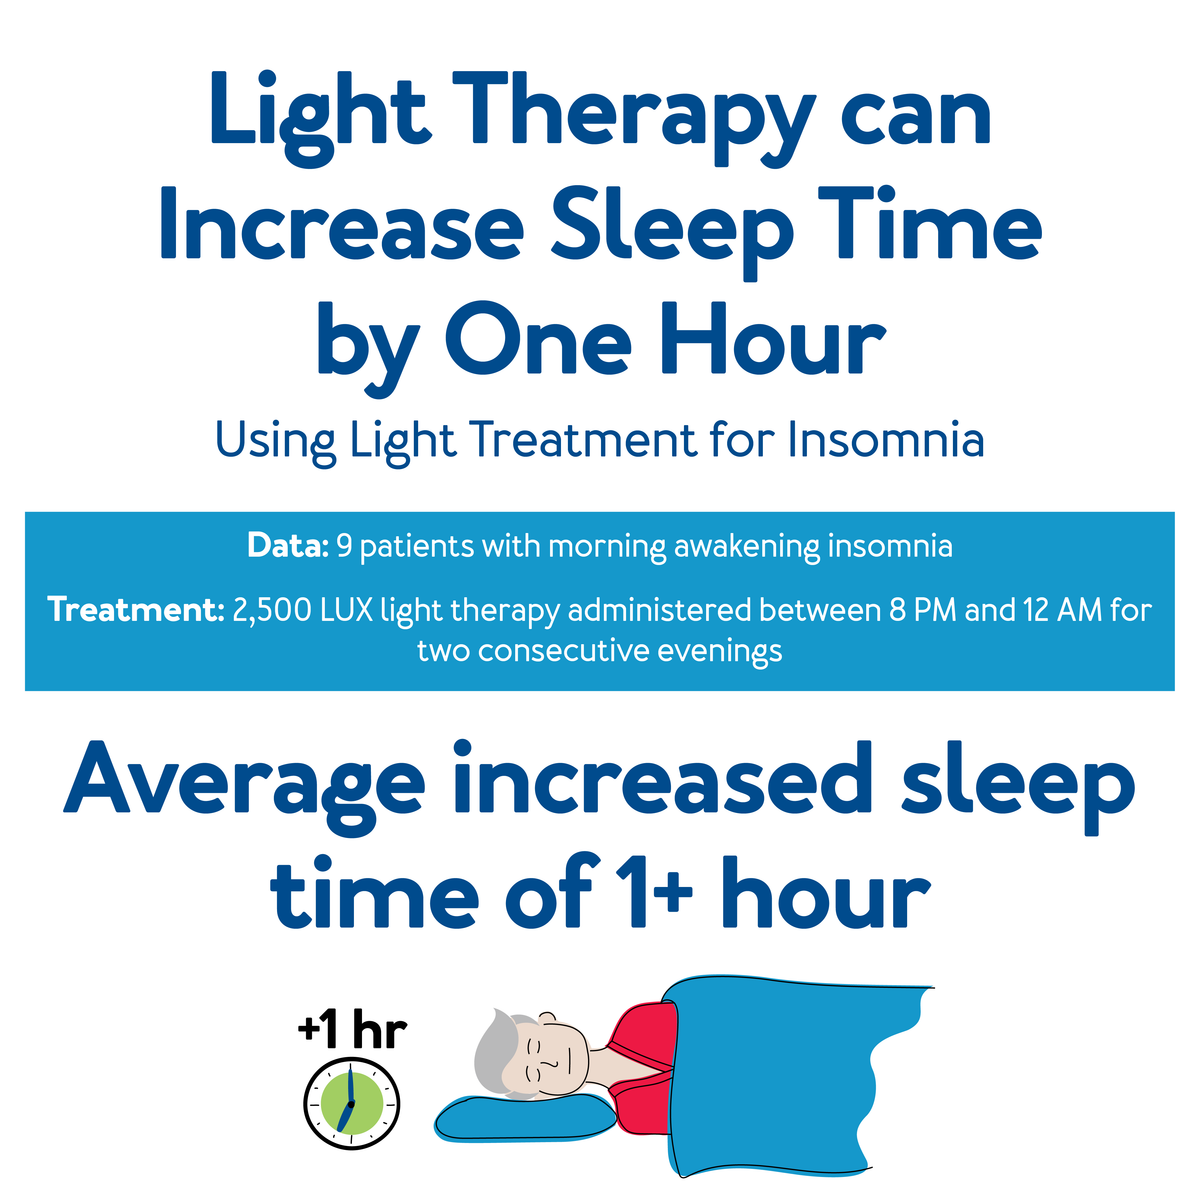 Light Therapy can Increase Sleep Time by One Hour, further details are provided below.